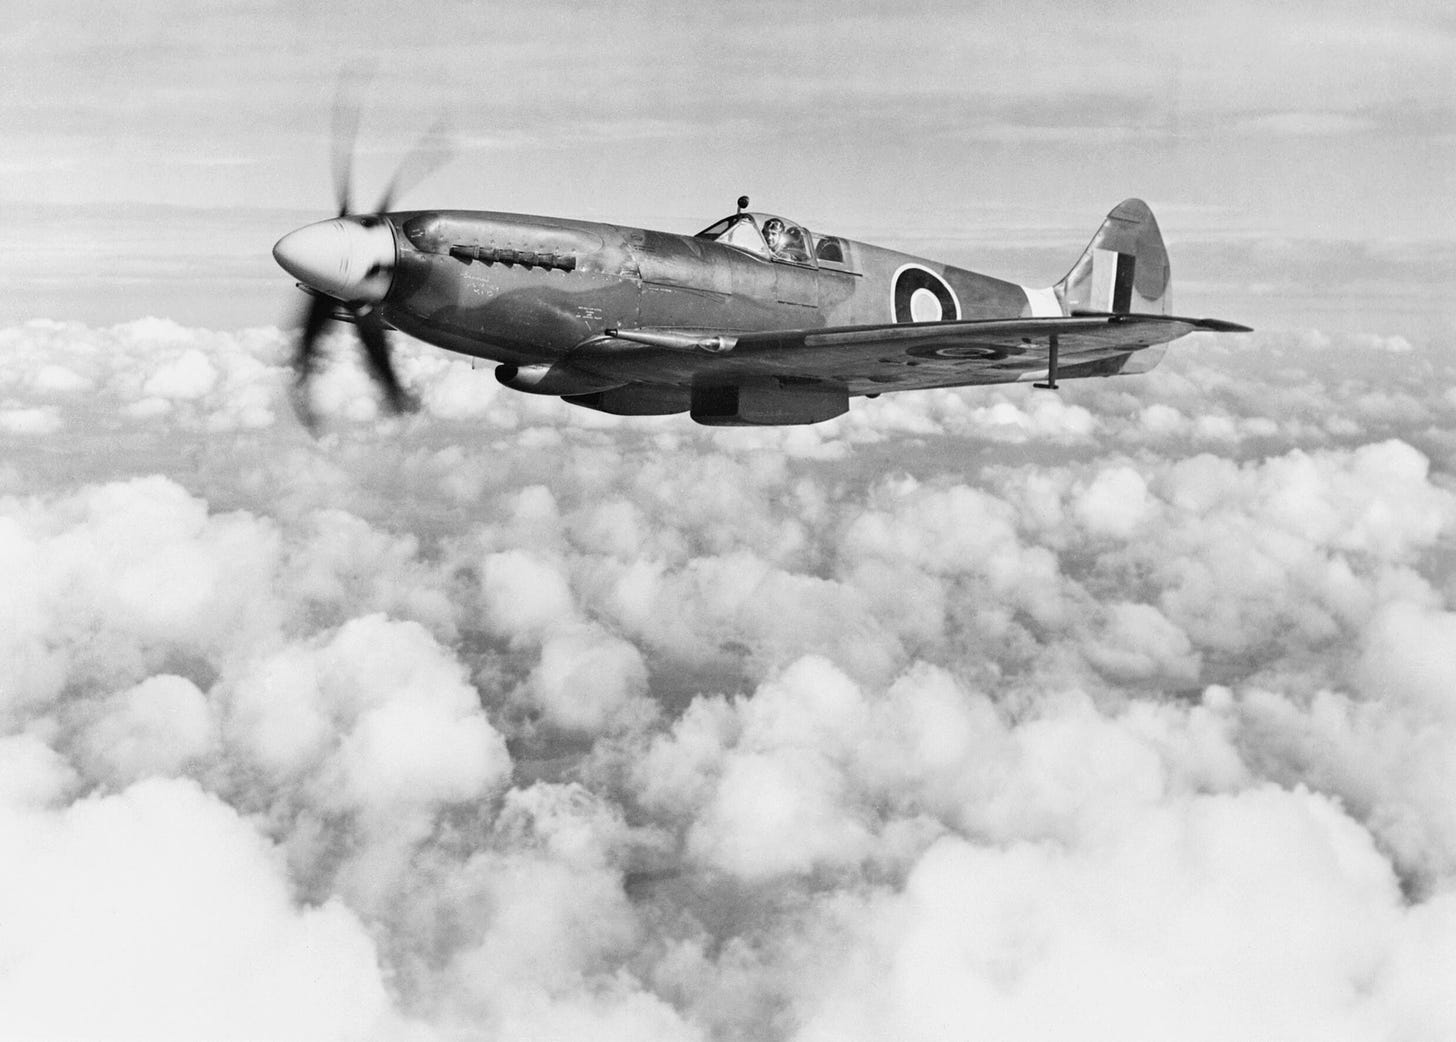 Supermarine_Spitfire_Mk_XIVe_RB140_in_March_1944._This_aircraft_served_operationally_with_Nos._616_and_610_Squadrons,_but_was_destroyed_in_a_landing_accident_at_Lympne_on_30_October_1944._E(MOS)1348.jpg